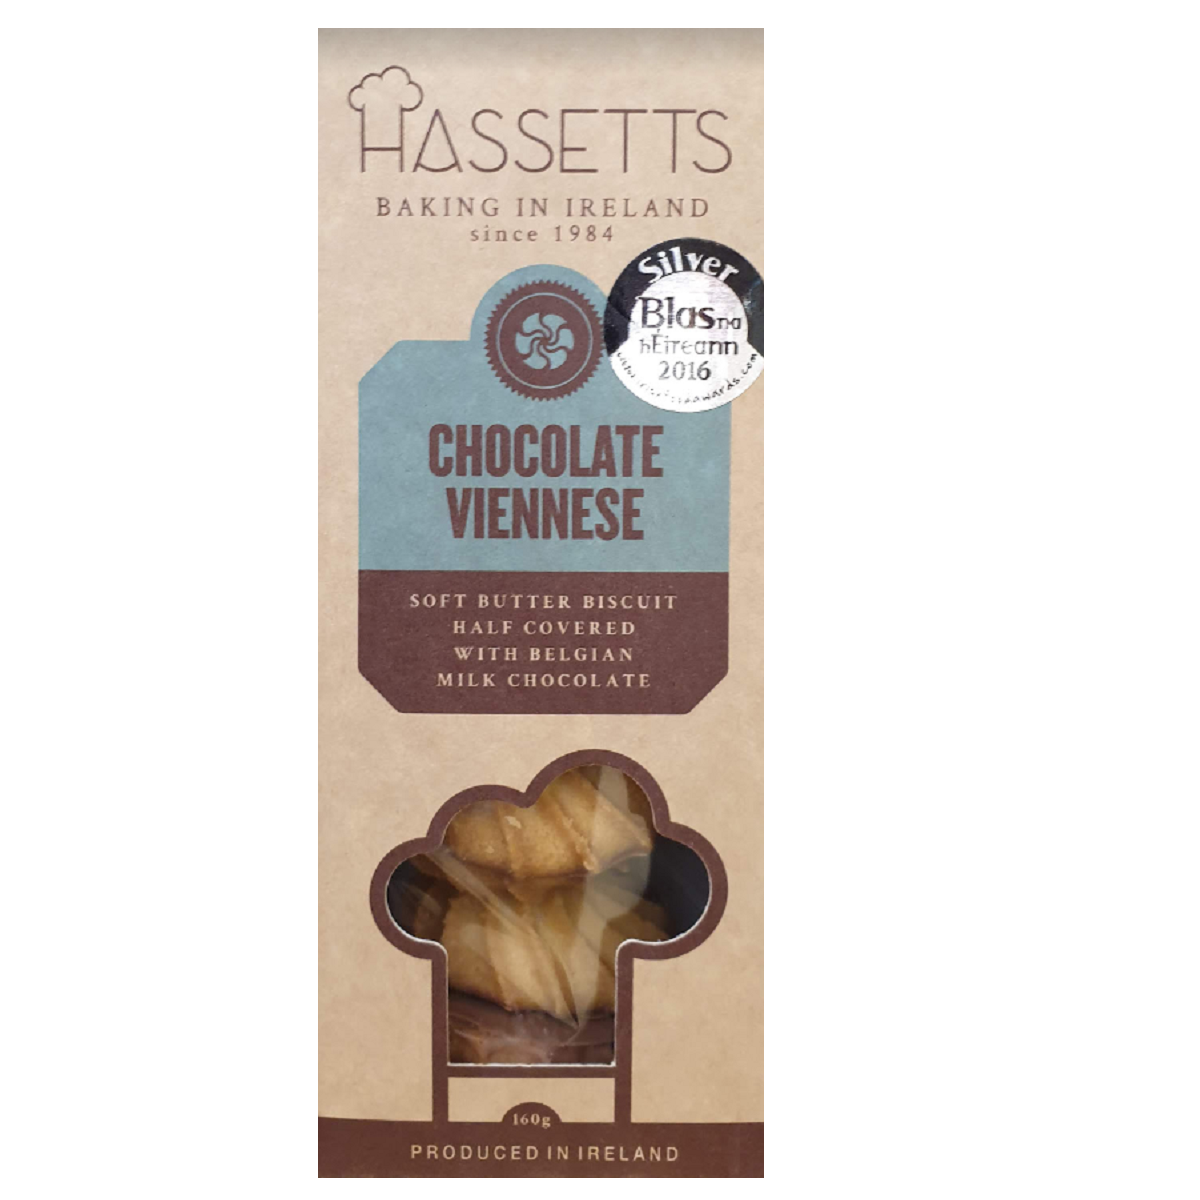 Hassetts Chocolate Viennese Soft Butter Biscuit 160g